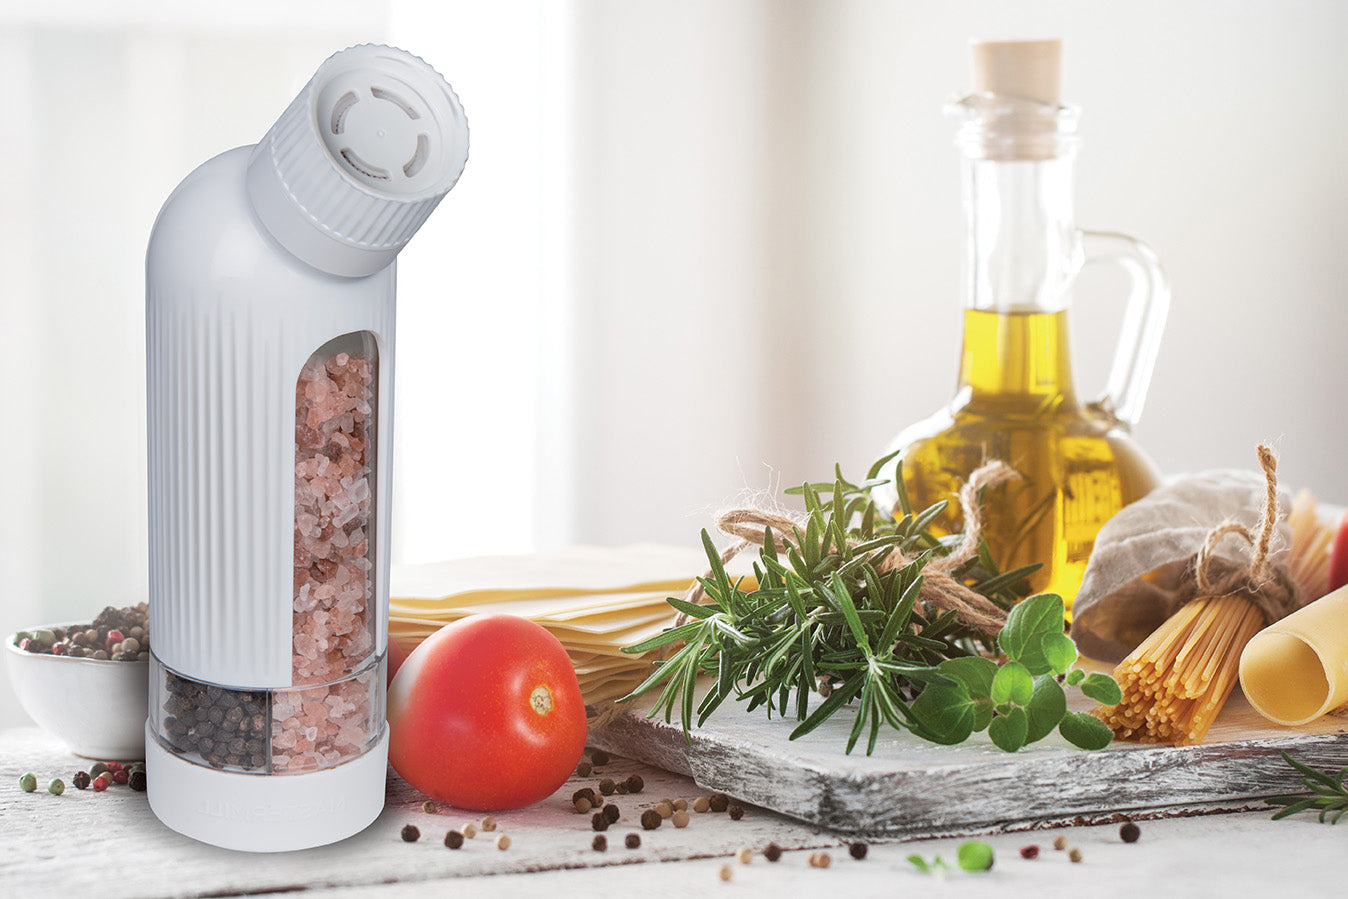 MASTERMILL 5-in-1 MULTI SECTION SPICE GRINDER & DISPENSER, WHITE (SPICES NOT INCLUDED)